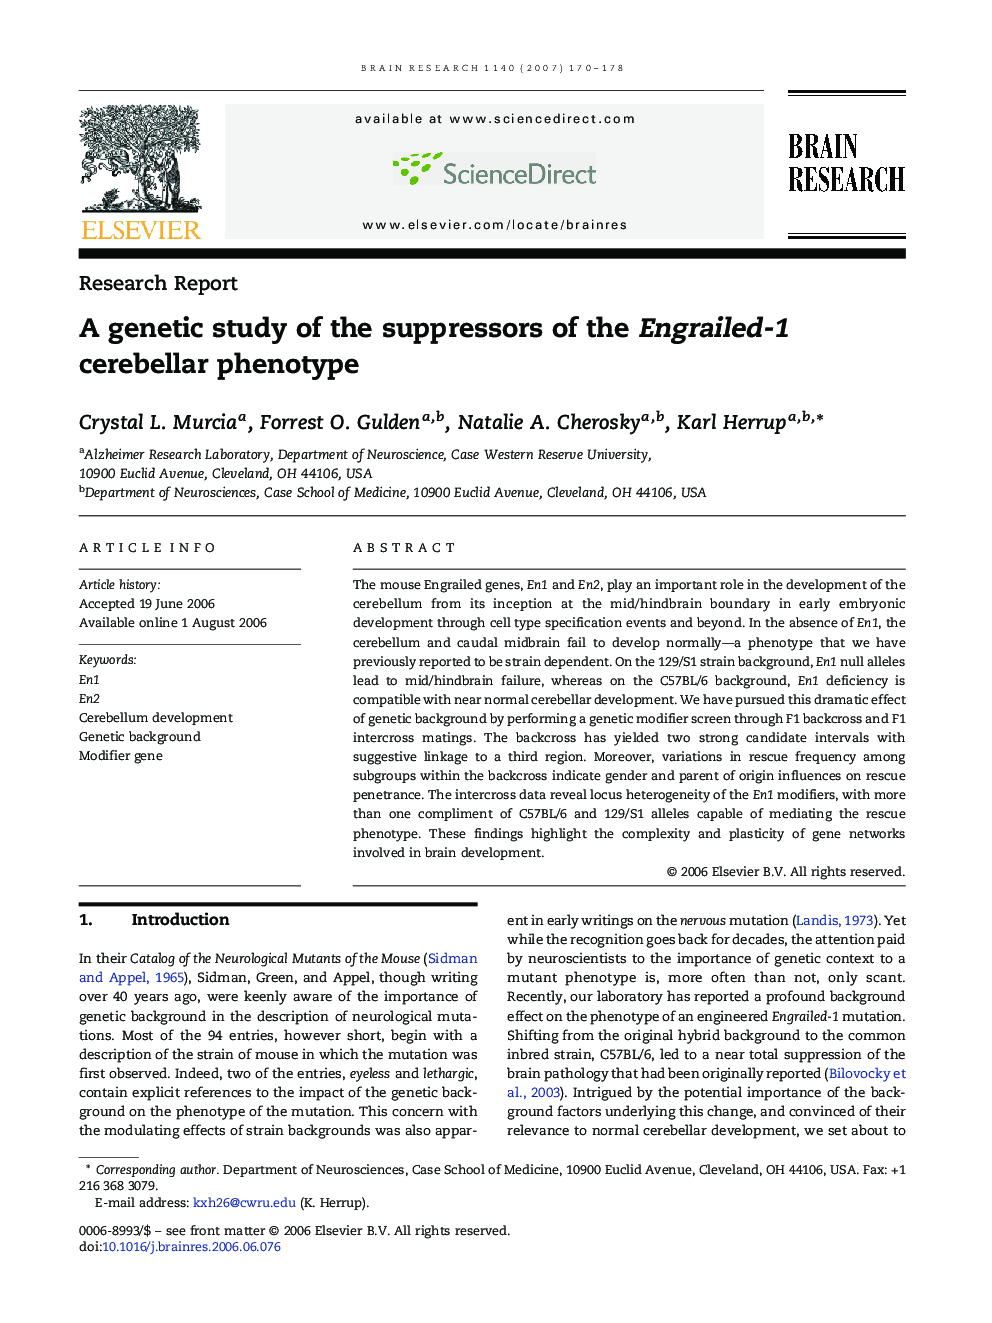 A genetic study of the suppressors of the Engrailed-1 cerebellar phenotype